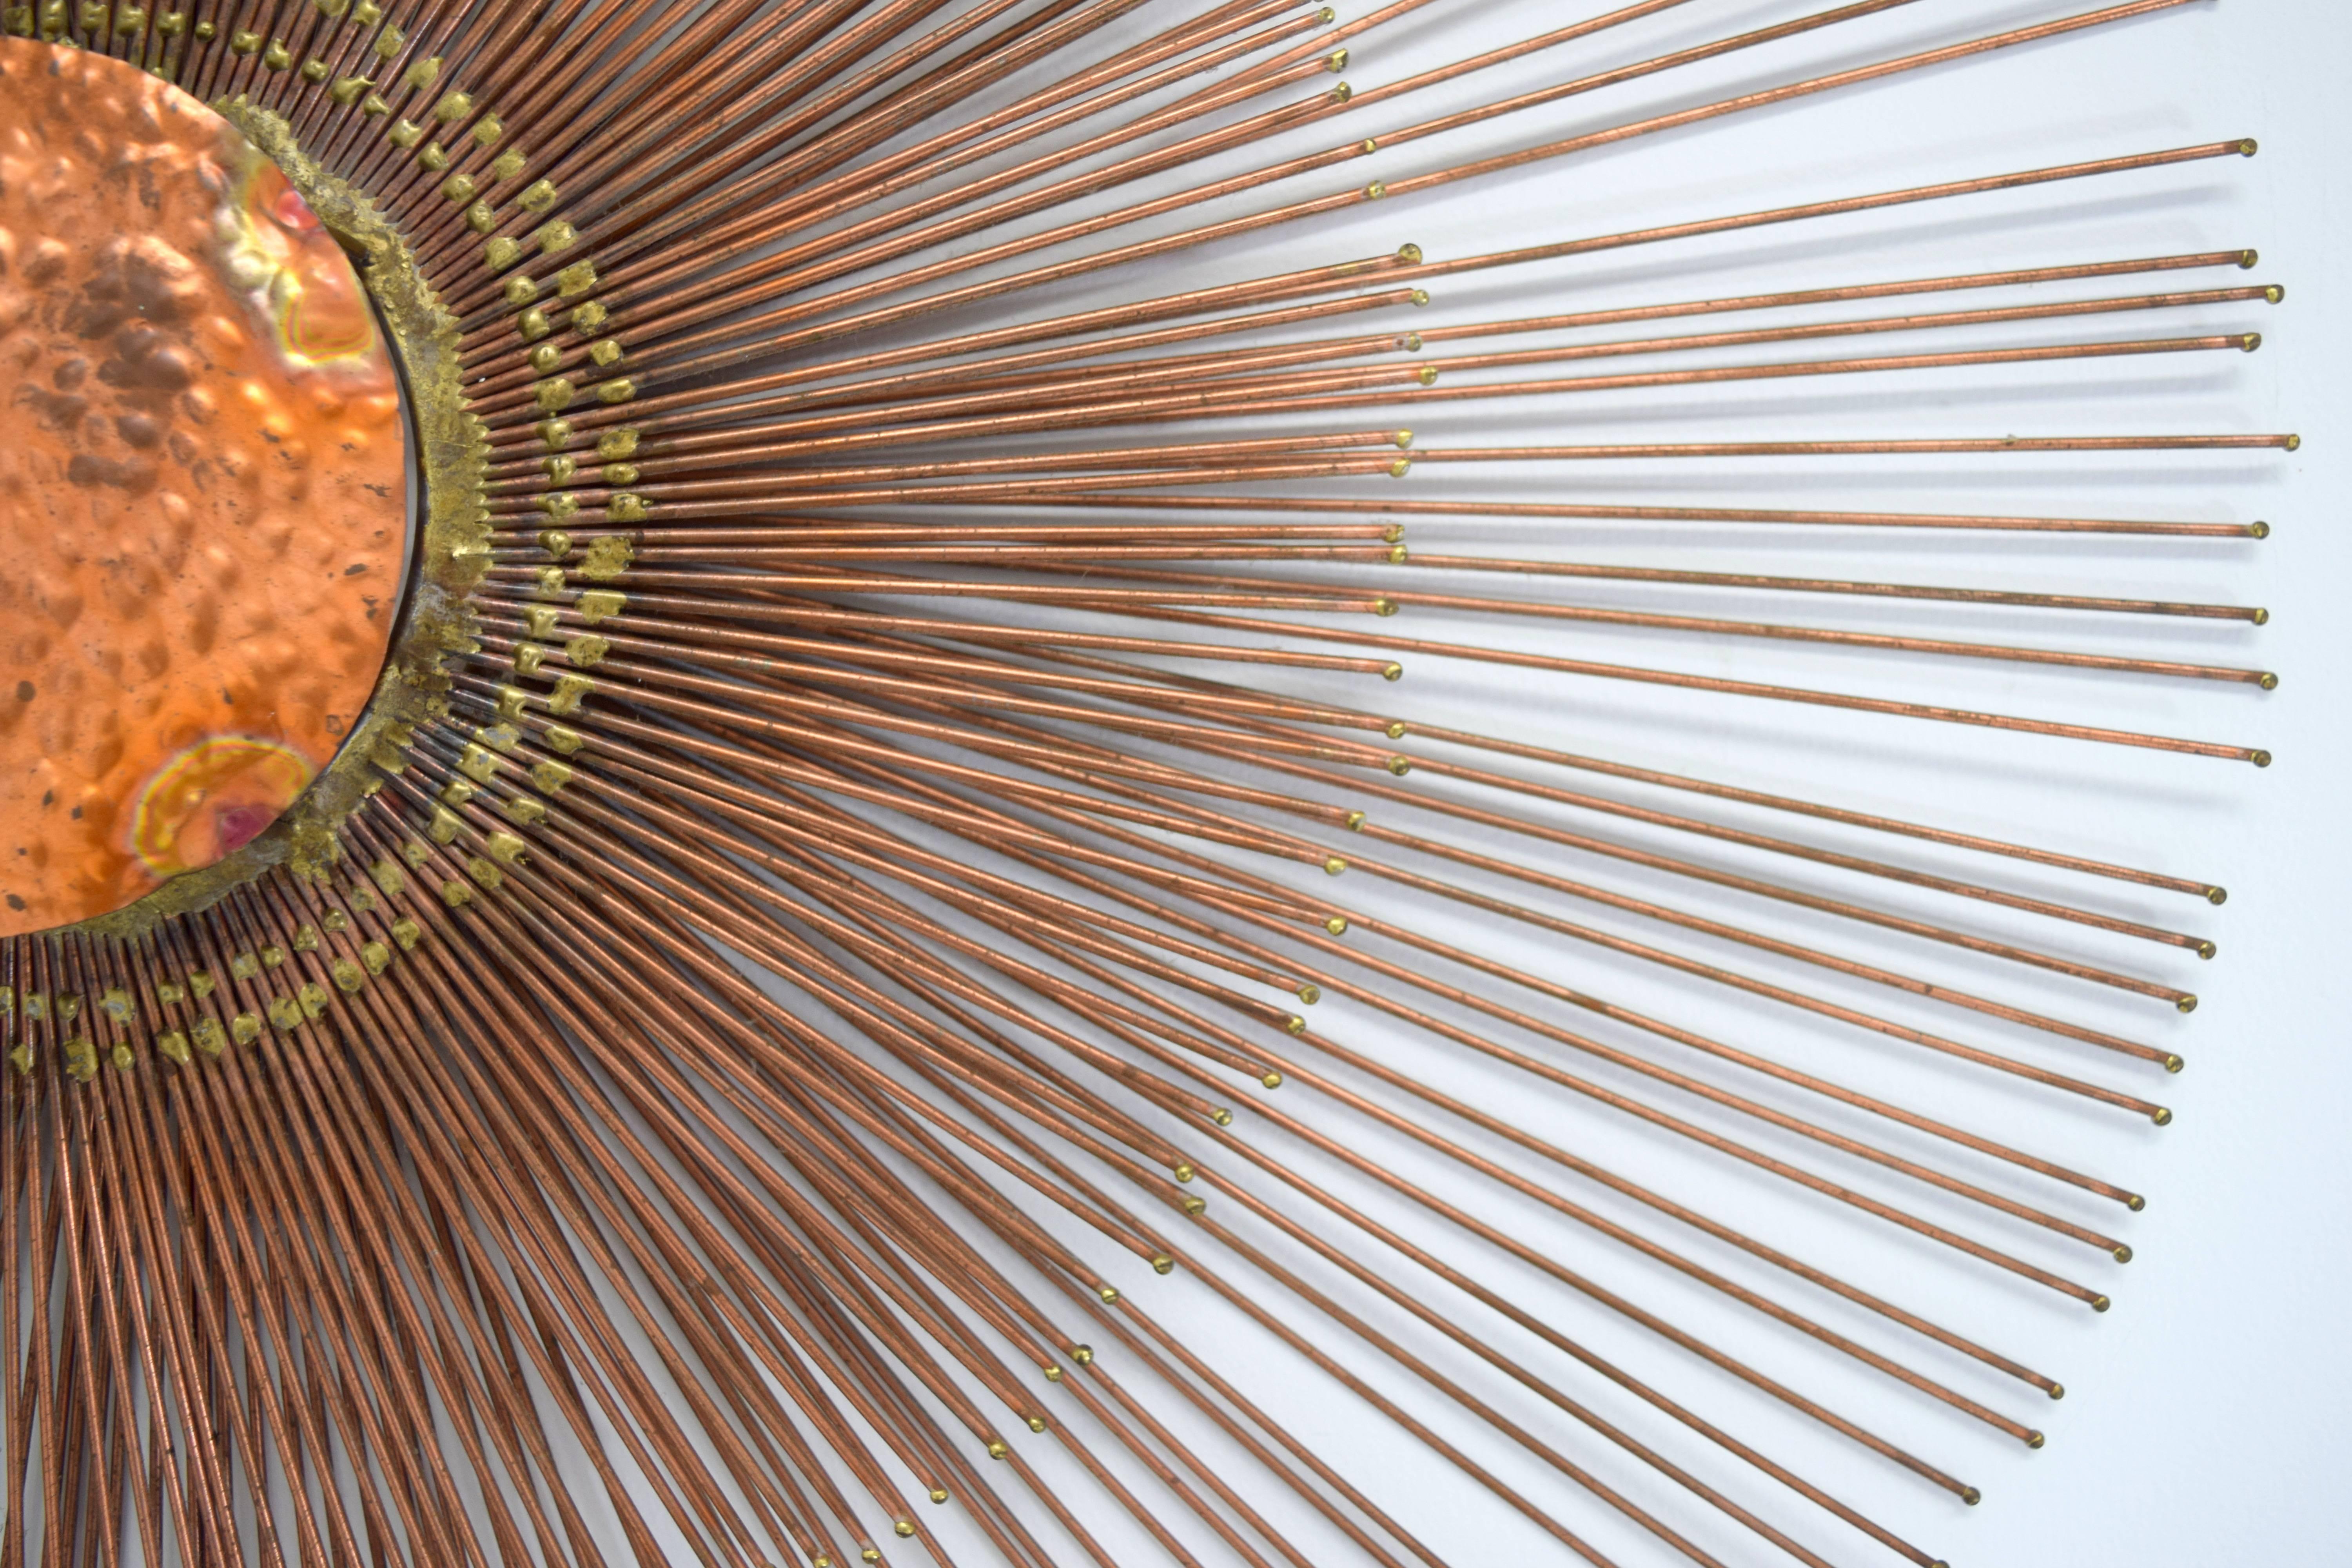 Striking copper wall sunburst wall sculpture by Curtis Jere. Two tiers of copper rods radiate around a central copper textured disc creating multi-level structured composition. Measure: Outer ring rays 29.25